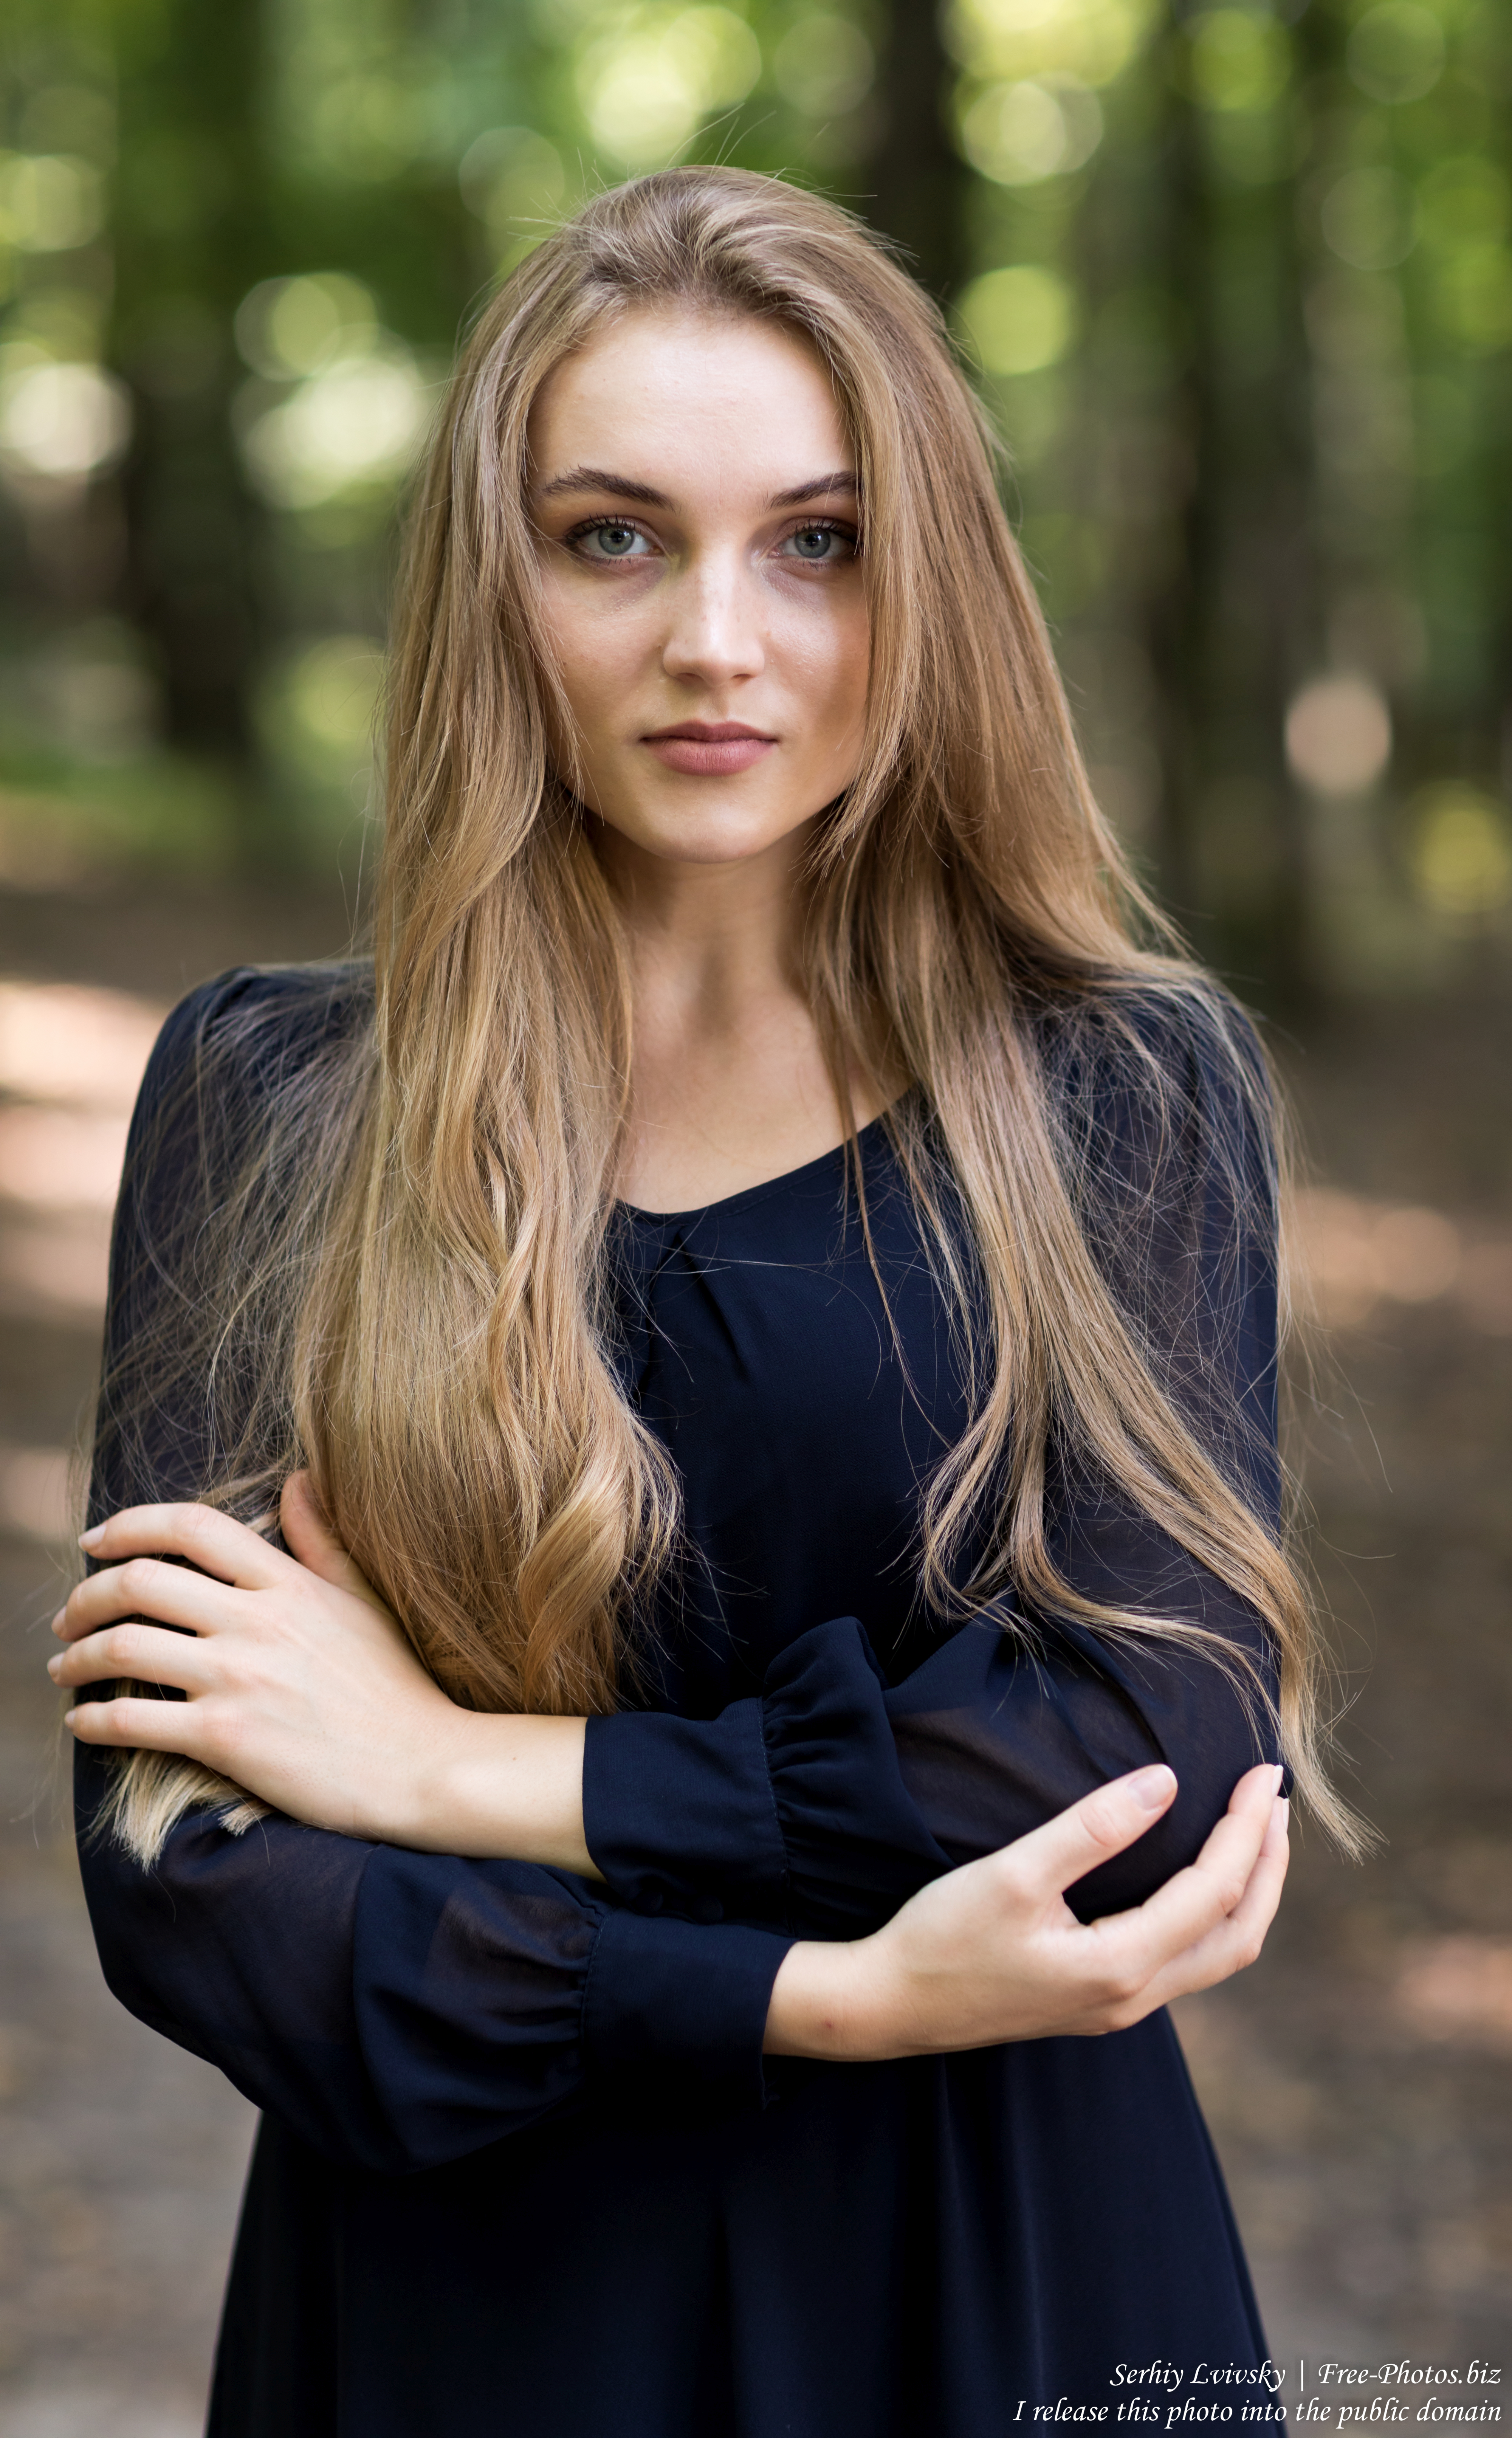 yaryna_a_21-year-old_natural_blonde_catholic_girl_photographed_in_august_2019_by_serhiy_lvivsky_35